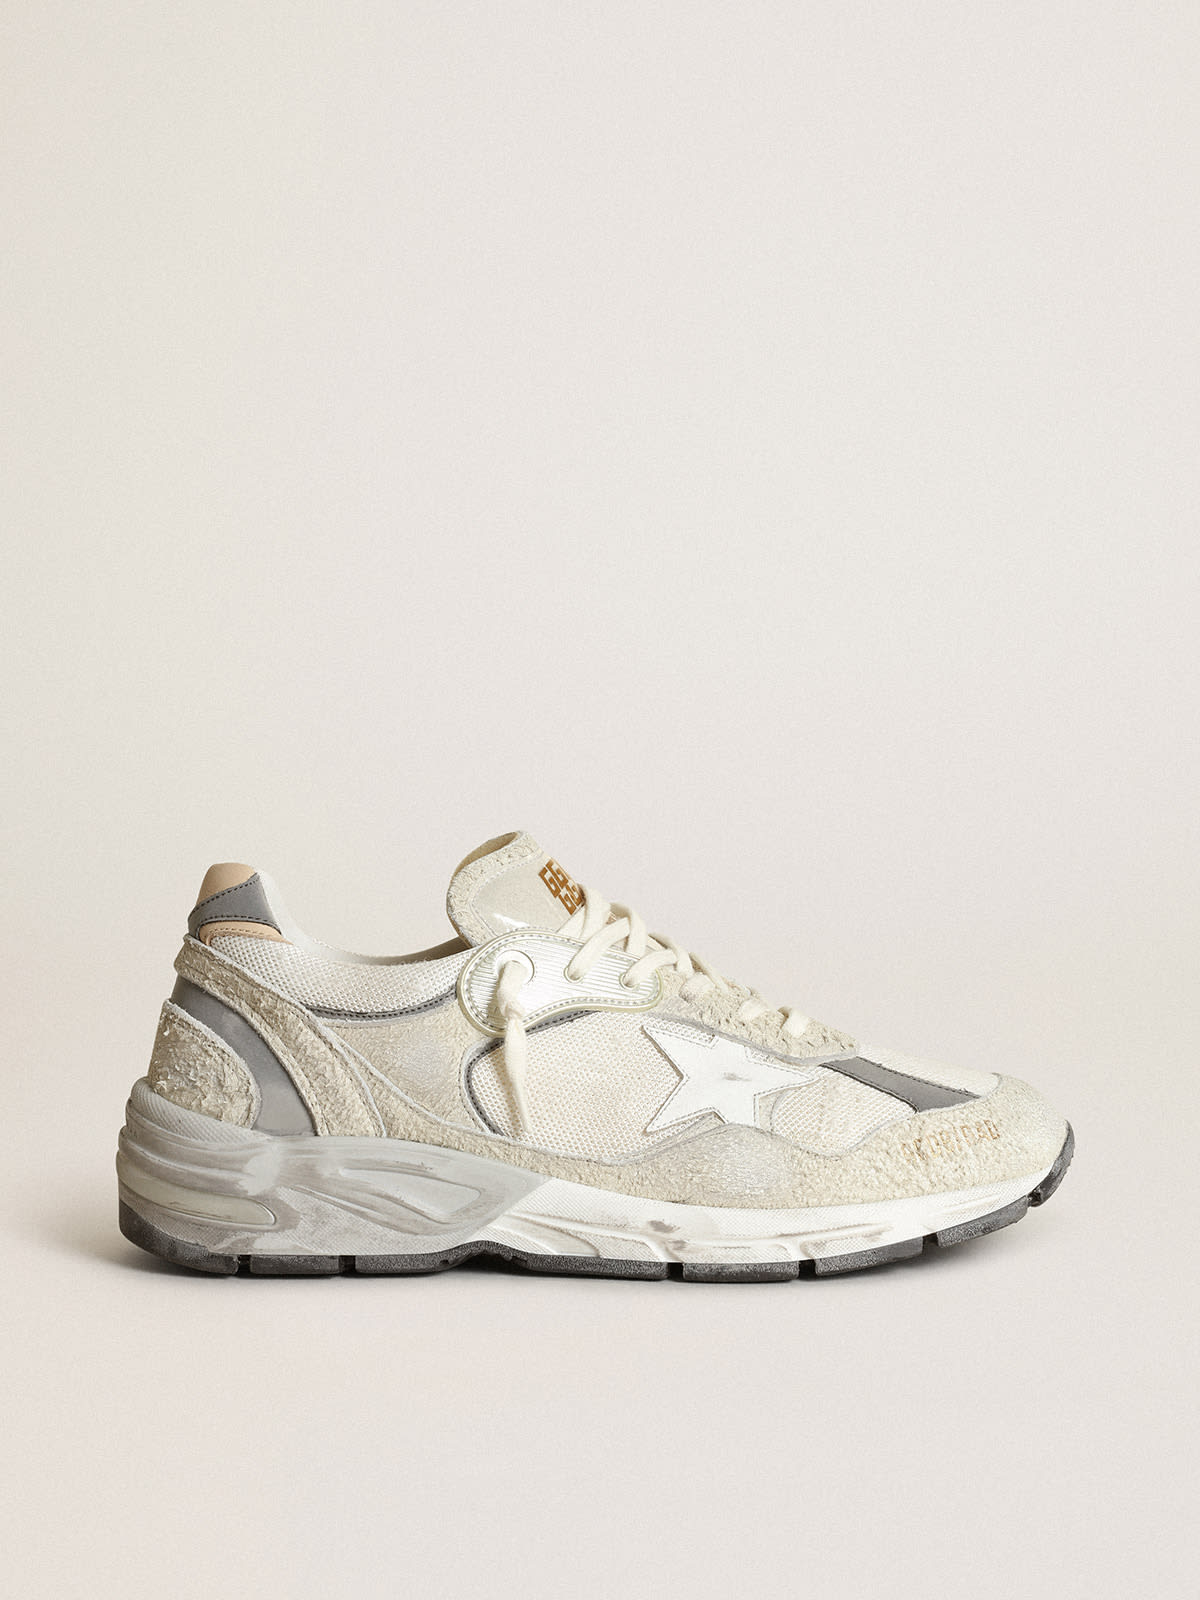 Golden Goose - Men's Dad-Star in white and gray suede and white leather star in 